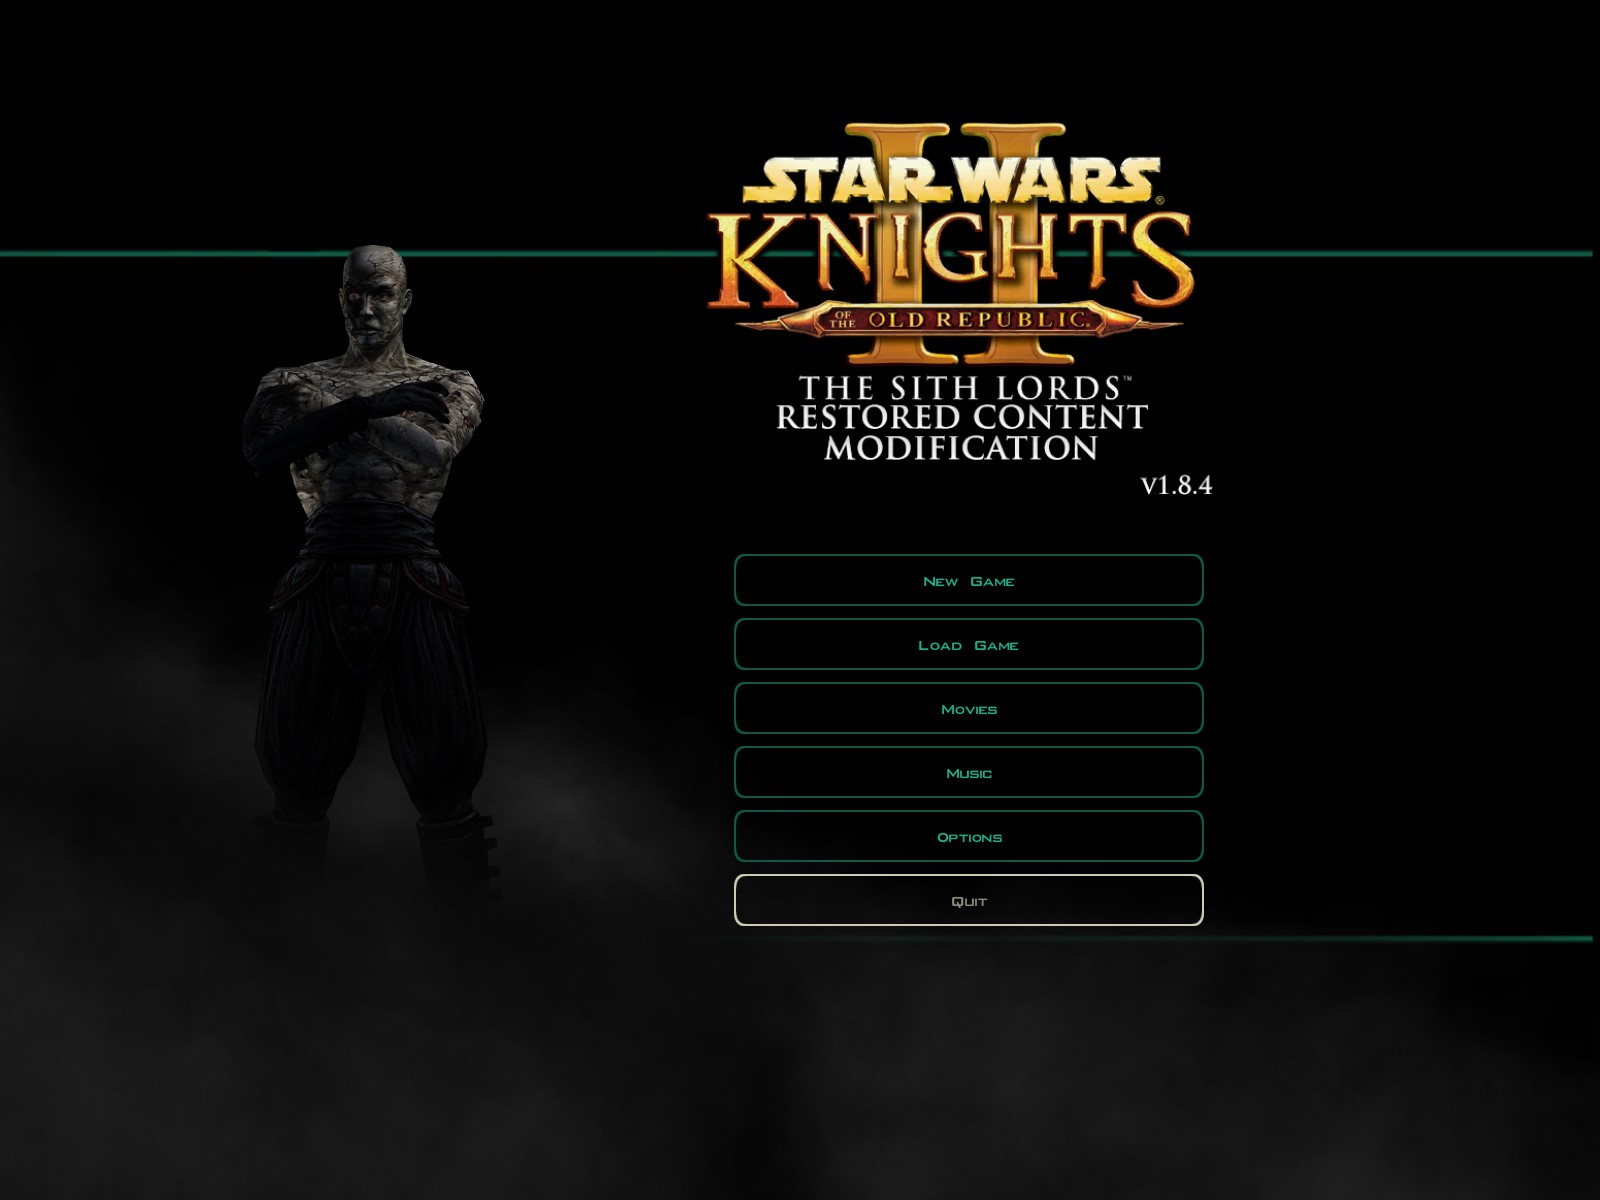 KOTOR 2 Gets Surprise Update On Steam, Mod Support And Widescreen Option Added